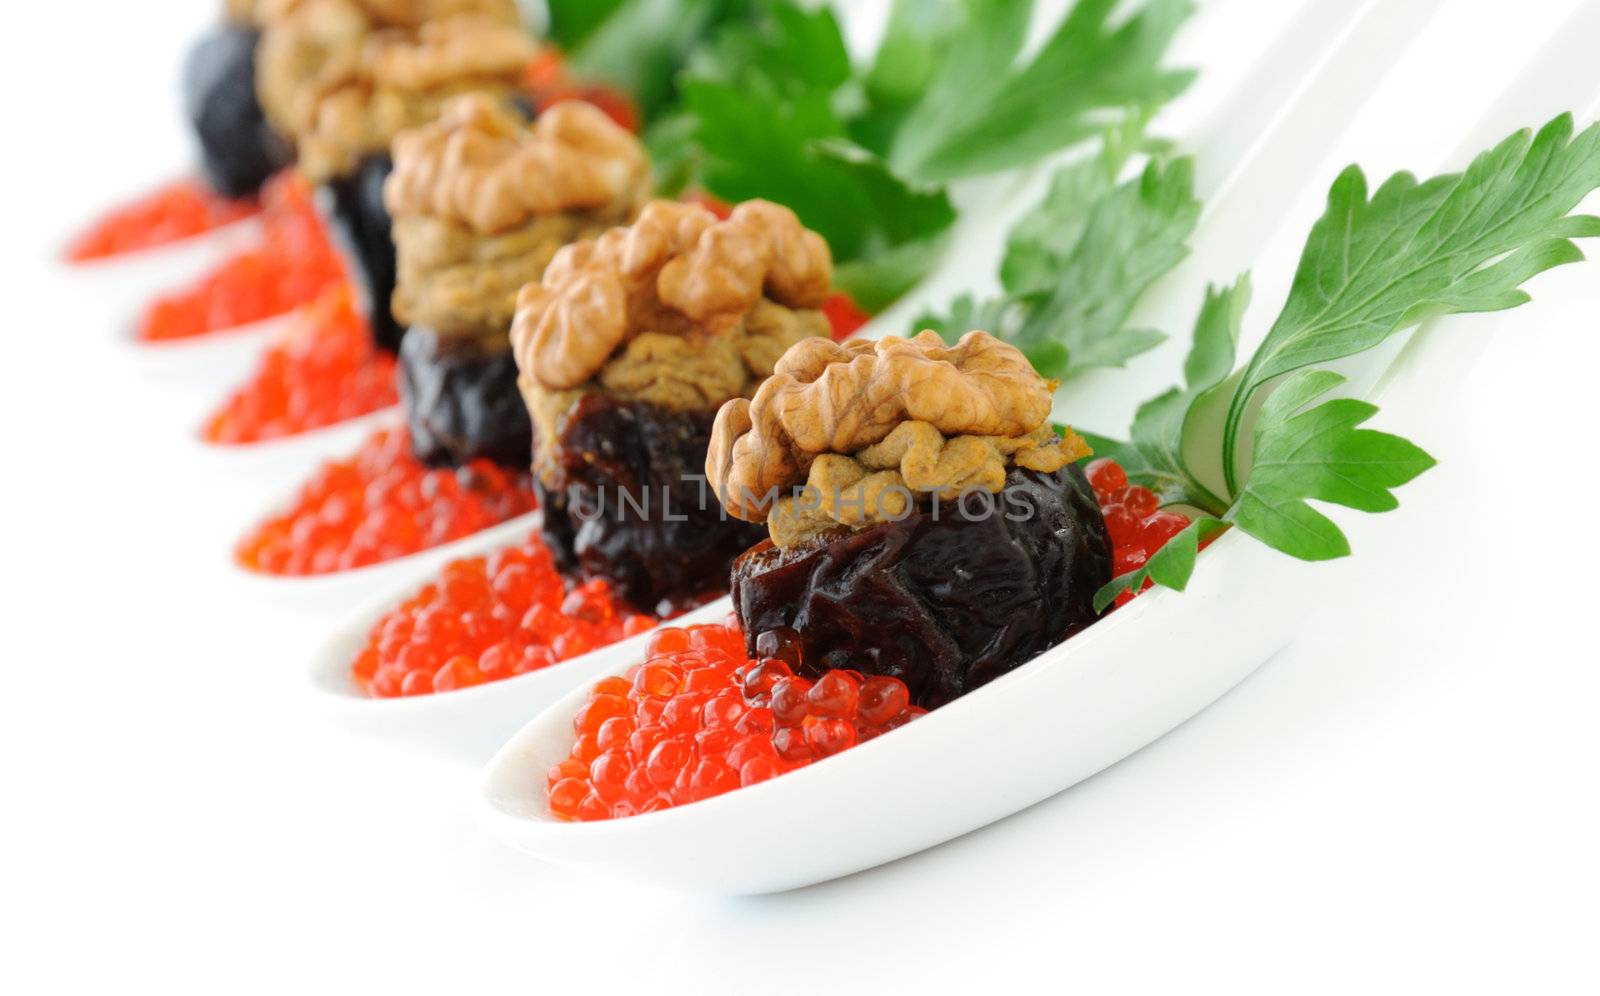 Prunes stuffed with liver pate with nuts in a red caviar